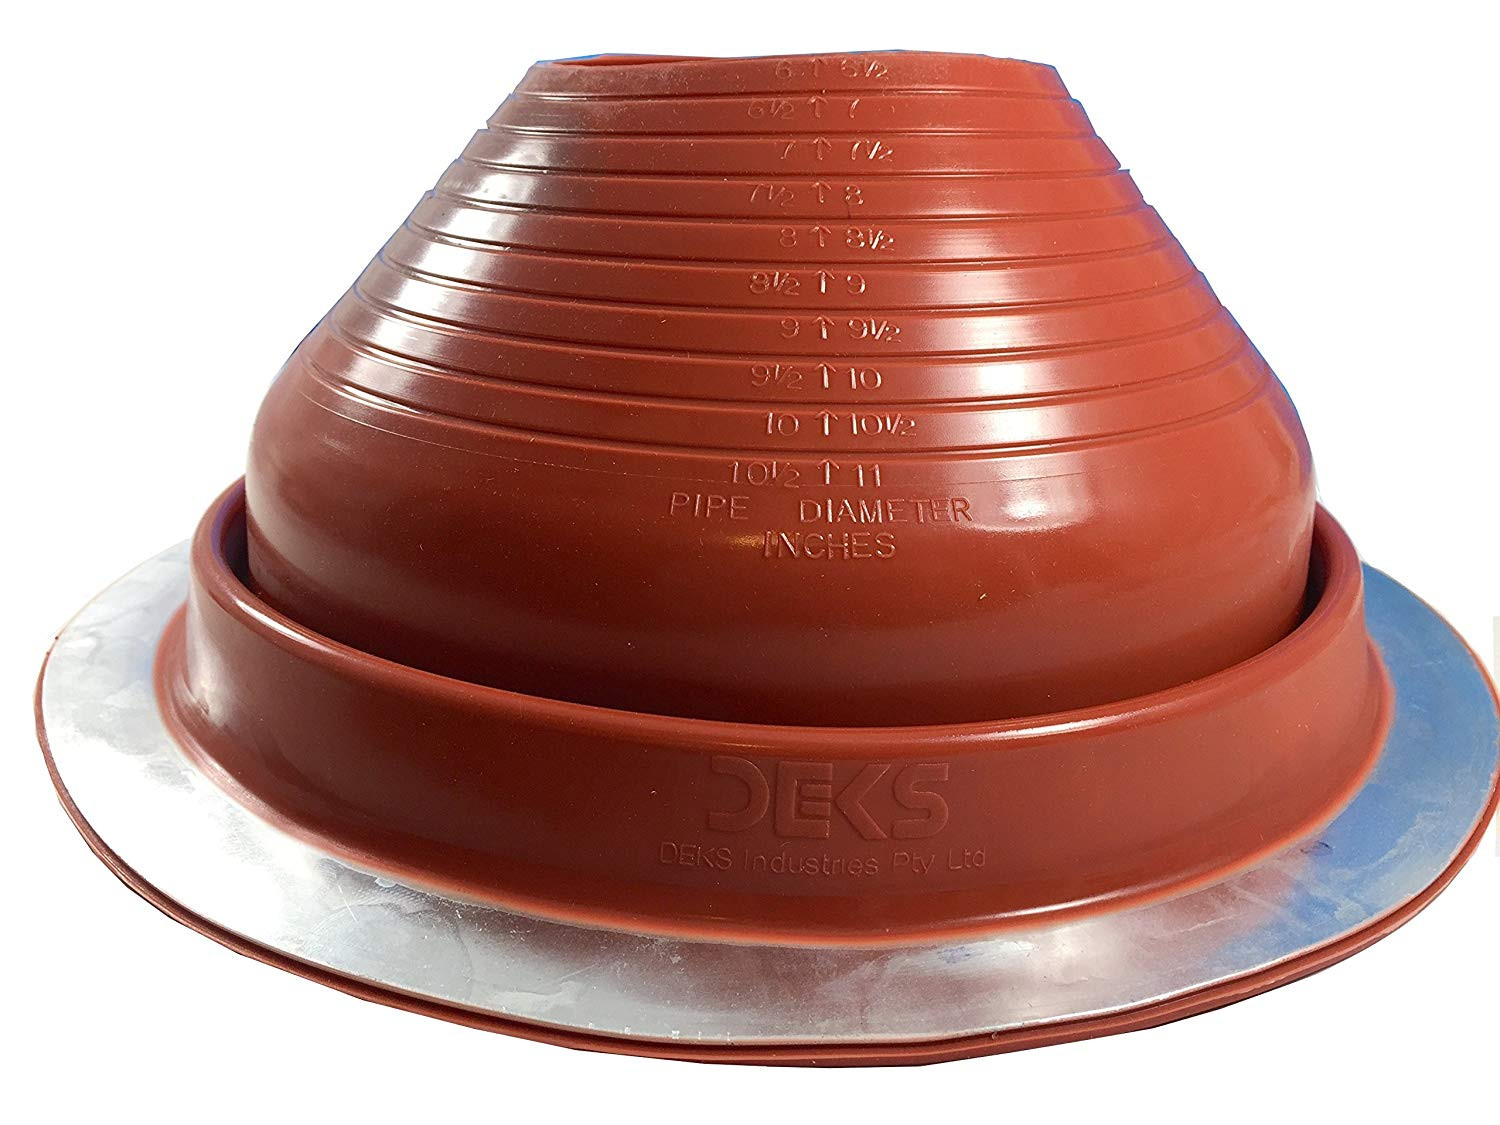 large red vases for sale of amazon com dektite round base pipe flashing boot 7 red high temp pertaining to amazon com dektite round base pipe flashing boot 7 red high temp silicone flexible pipe flashing dektite for od pipe sizes 6eo 11eoroof jack pipe